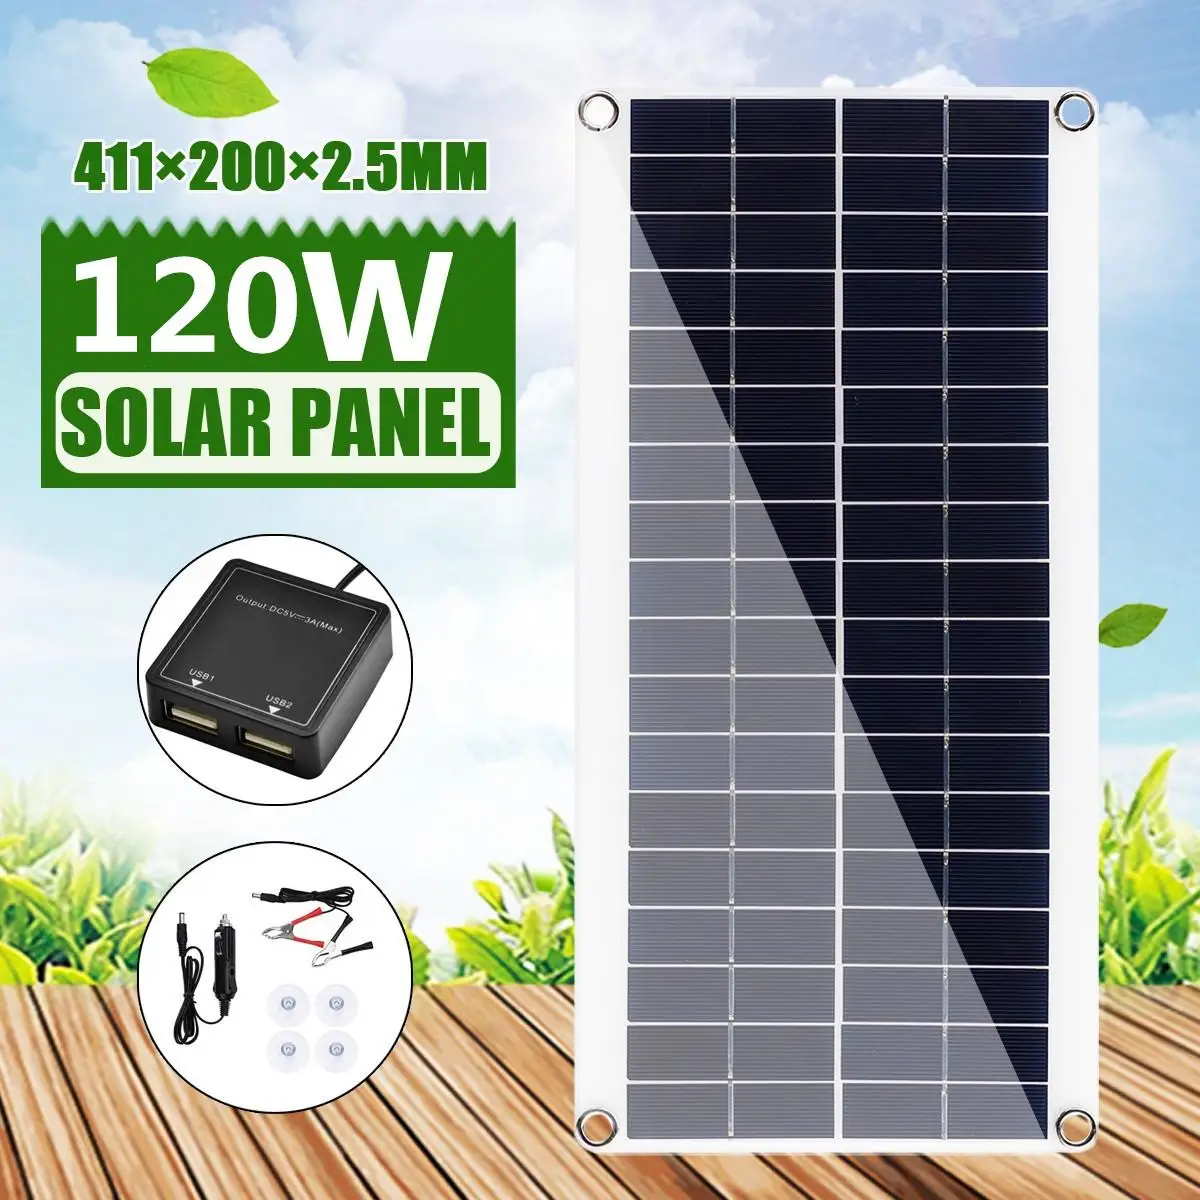 120W Portable Solar Panel Battery Charger DC 18V Solar Cell Board Crocodile Clips Car charger For Phone RV Car 411X200X2.5MM